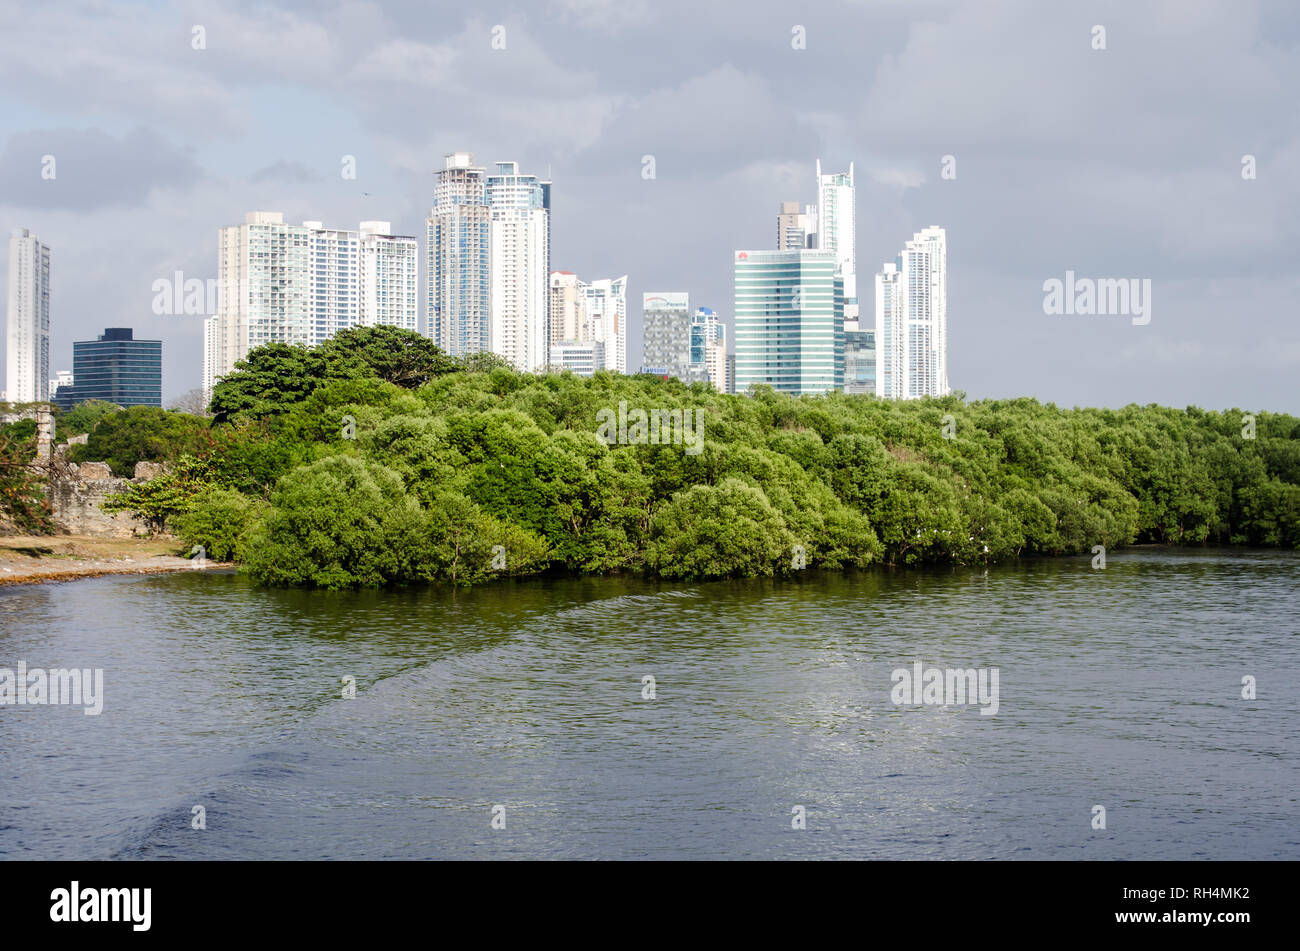 Panama Bay mangroves and Costa del Este neighborhood in the background Stock Photo